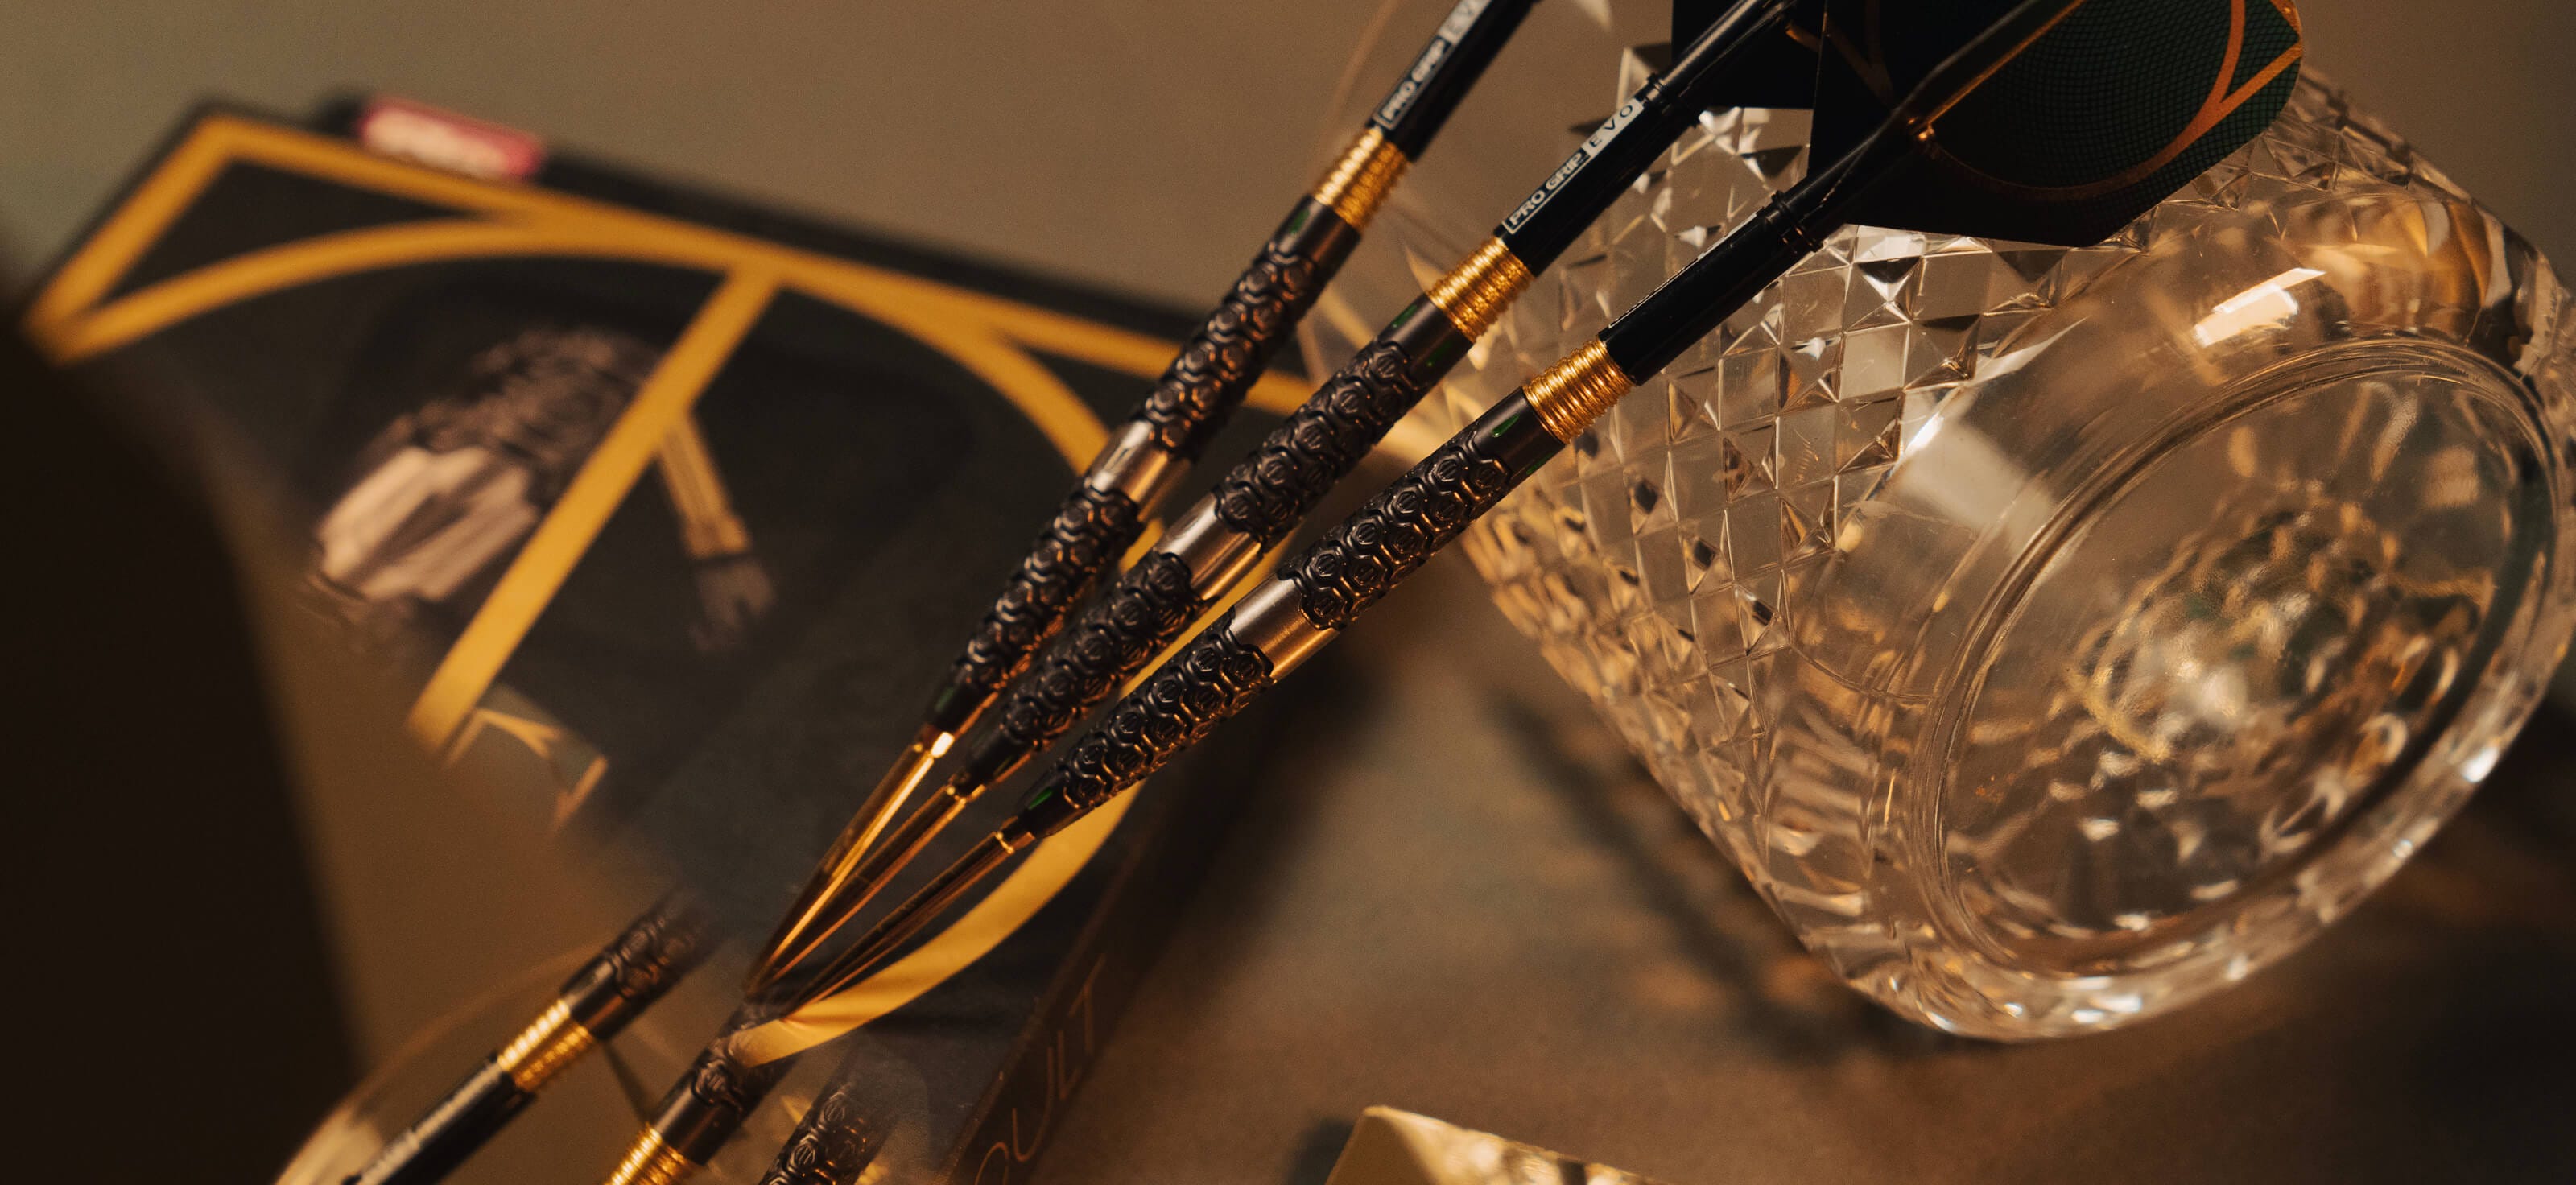 The Cult Dart range is a luxury range of Steel Tip and Soft Tip Darts